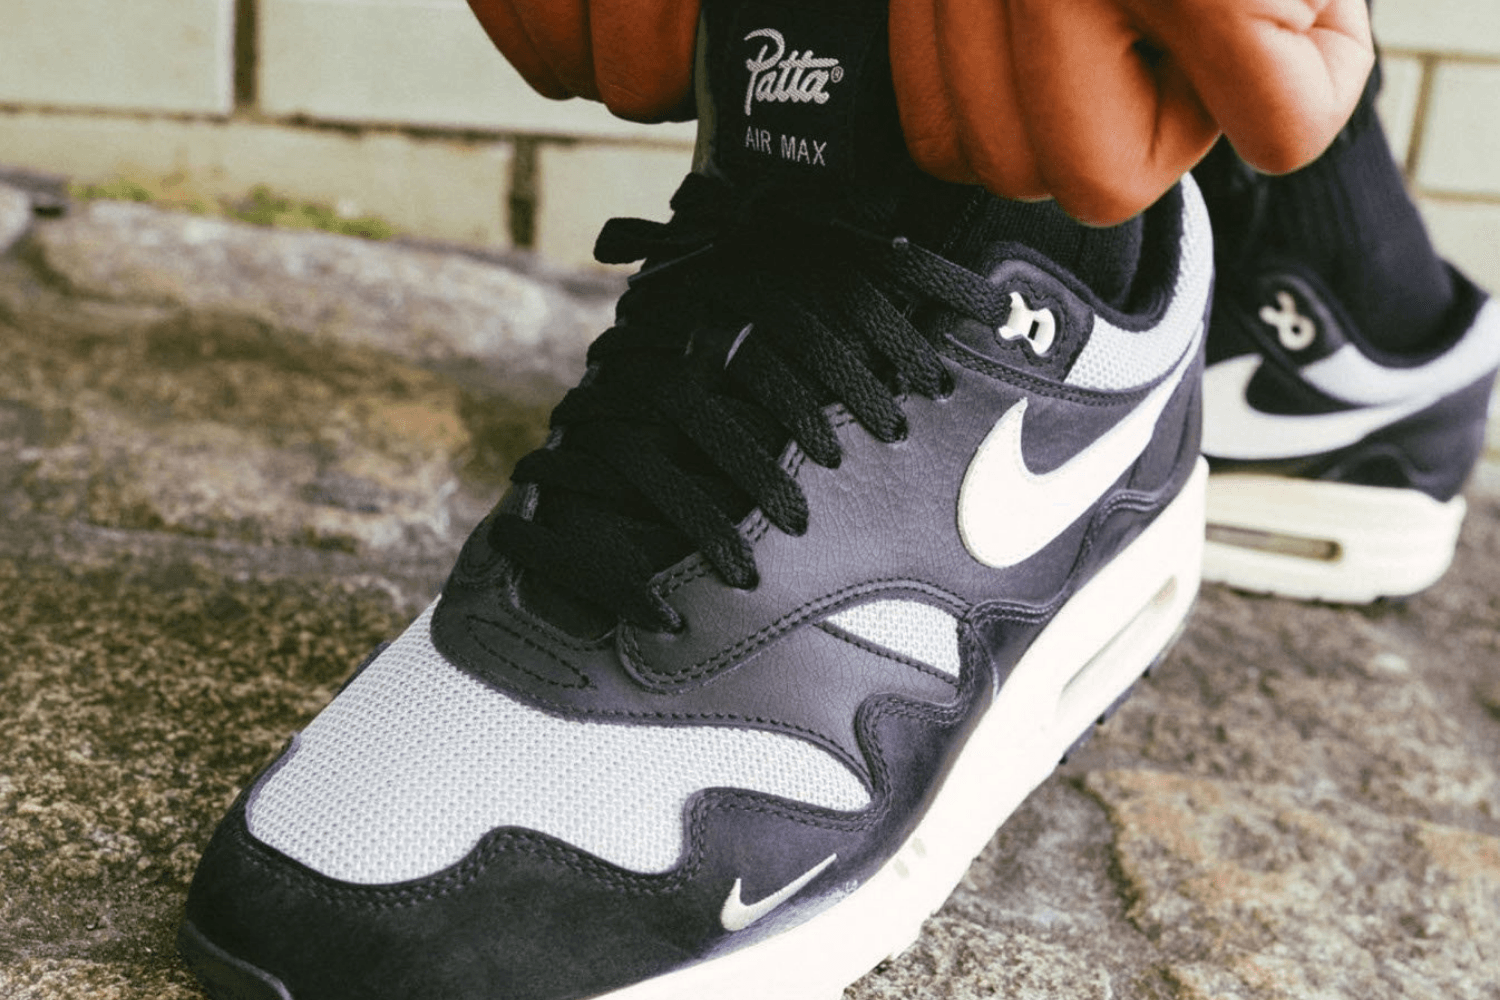 The Patta x Nike Air Max 1 'Black' - The Wave has a release date